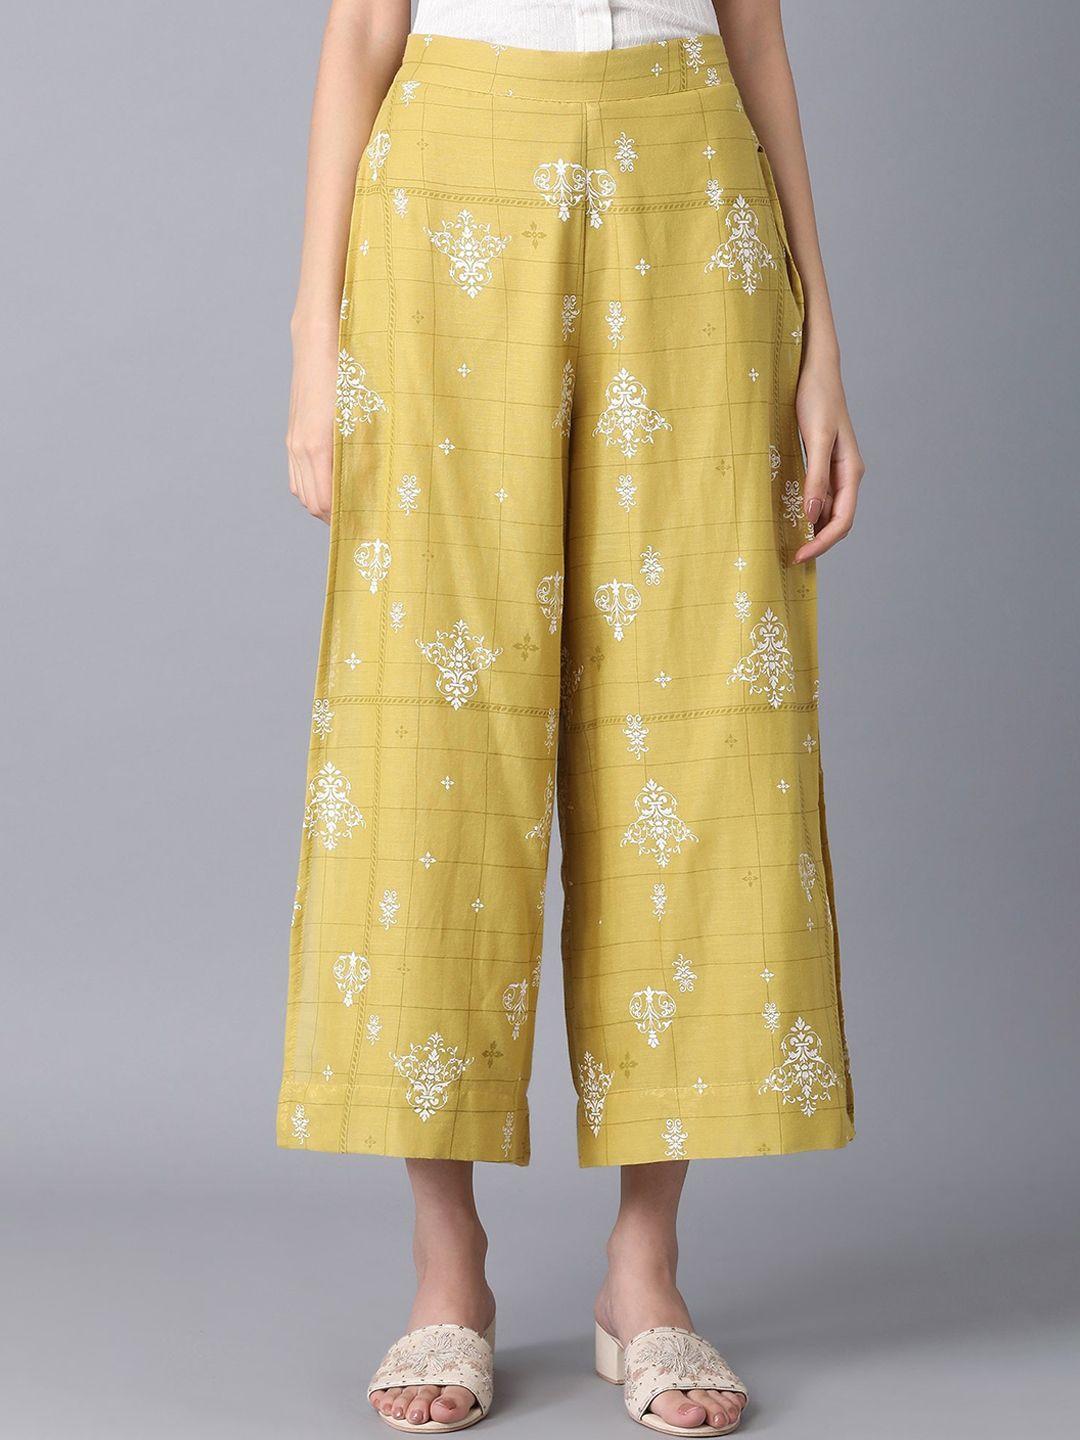 elleven-women-olive-green-ethnic-motifs-printed-loose-fit-culottes-trousers